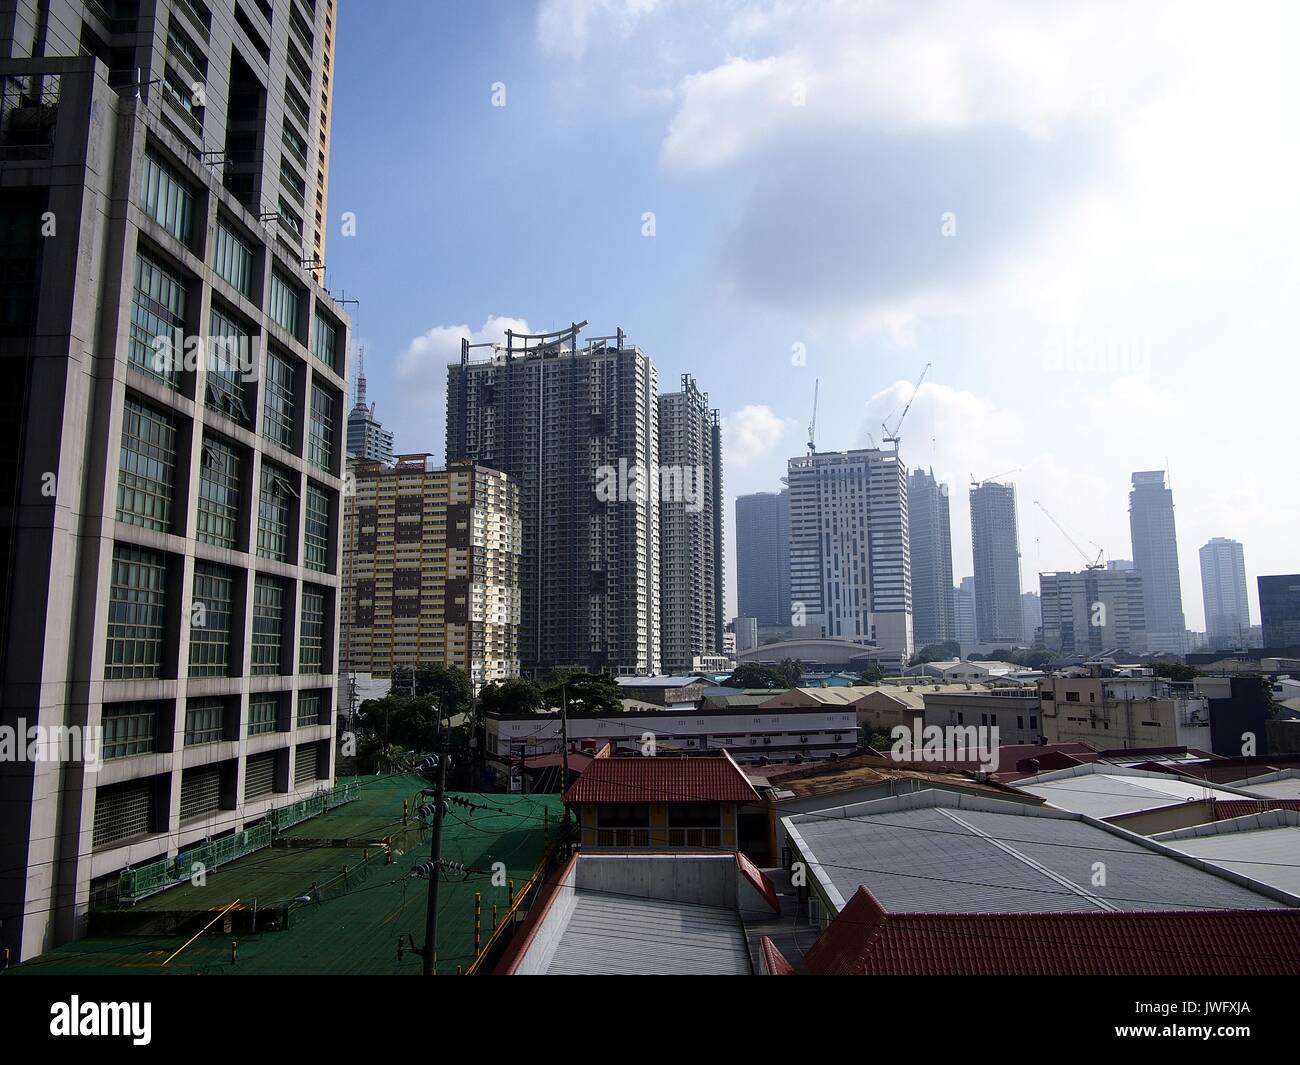 MANDALUYONG CITY, PHILIPPINES - AUGUST 8, 2017: Commercial and residential buildings. Stock Photo